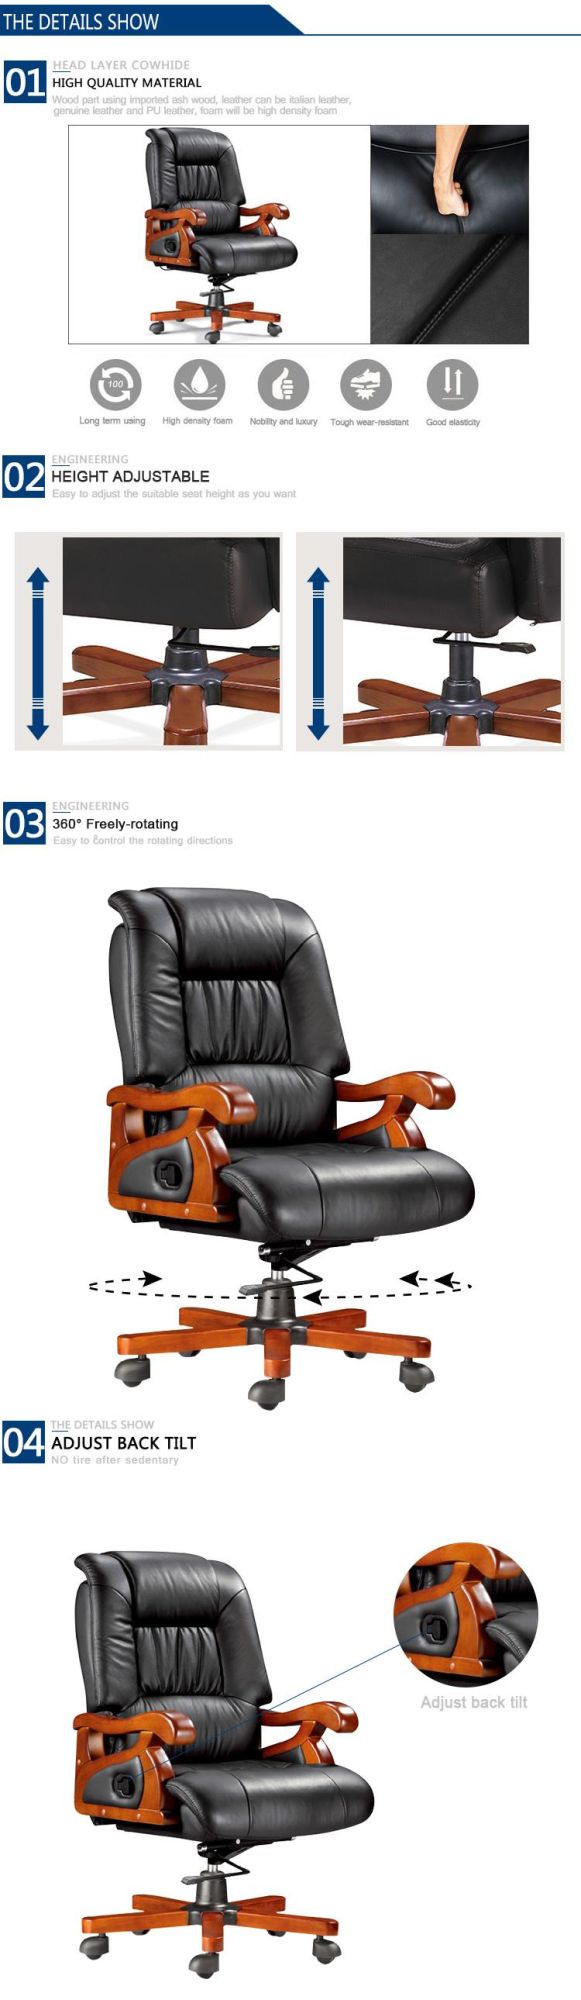 Multi-Functional Black Leather Office Chair/Modern Computer Office Furniture/Swivel Chair